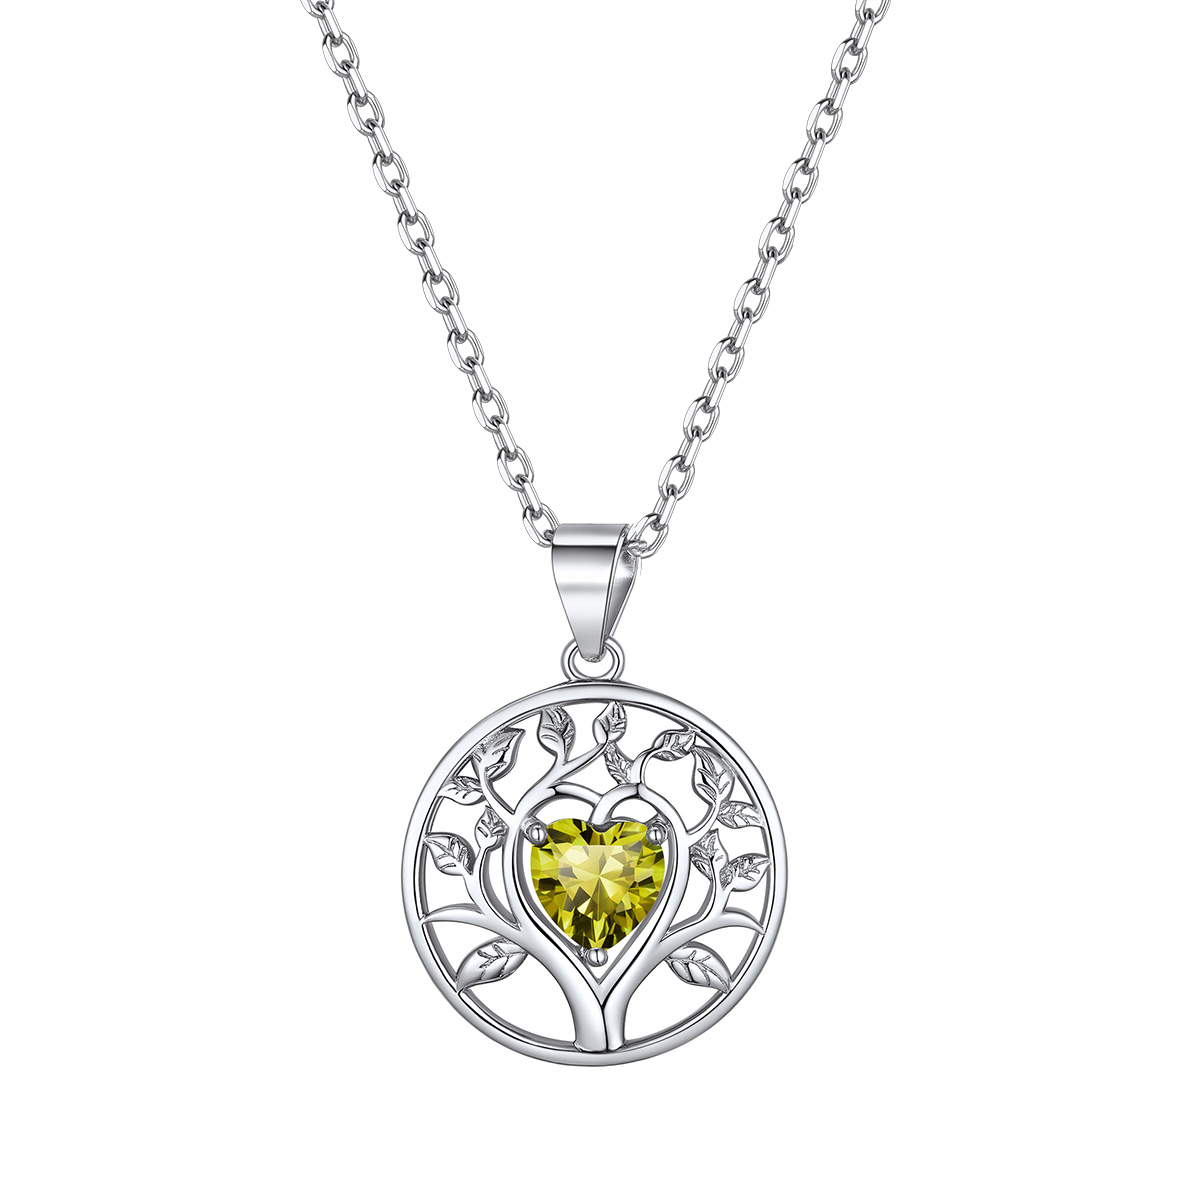 ChicSilver Sterling Silver Tree of Life Necklace With Birthstone for Women